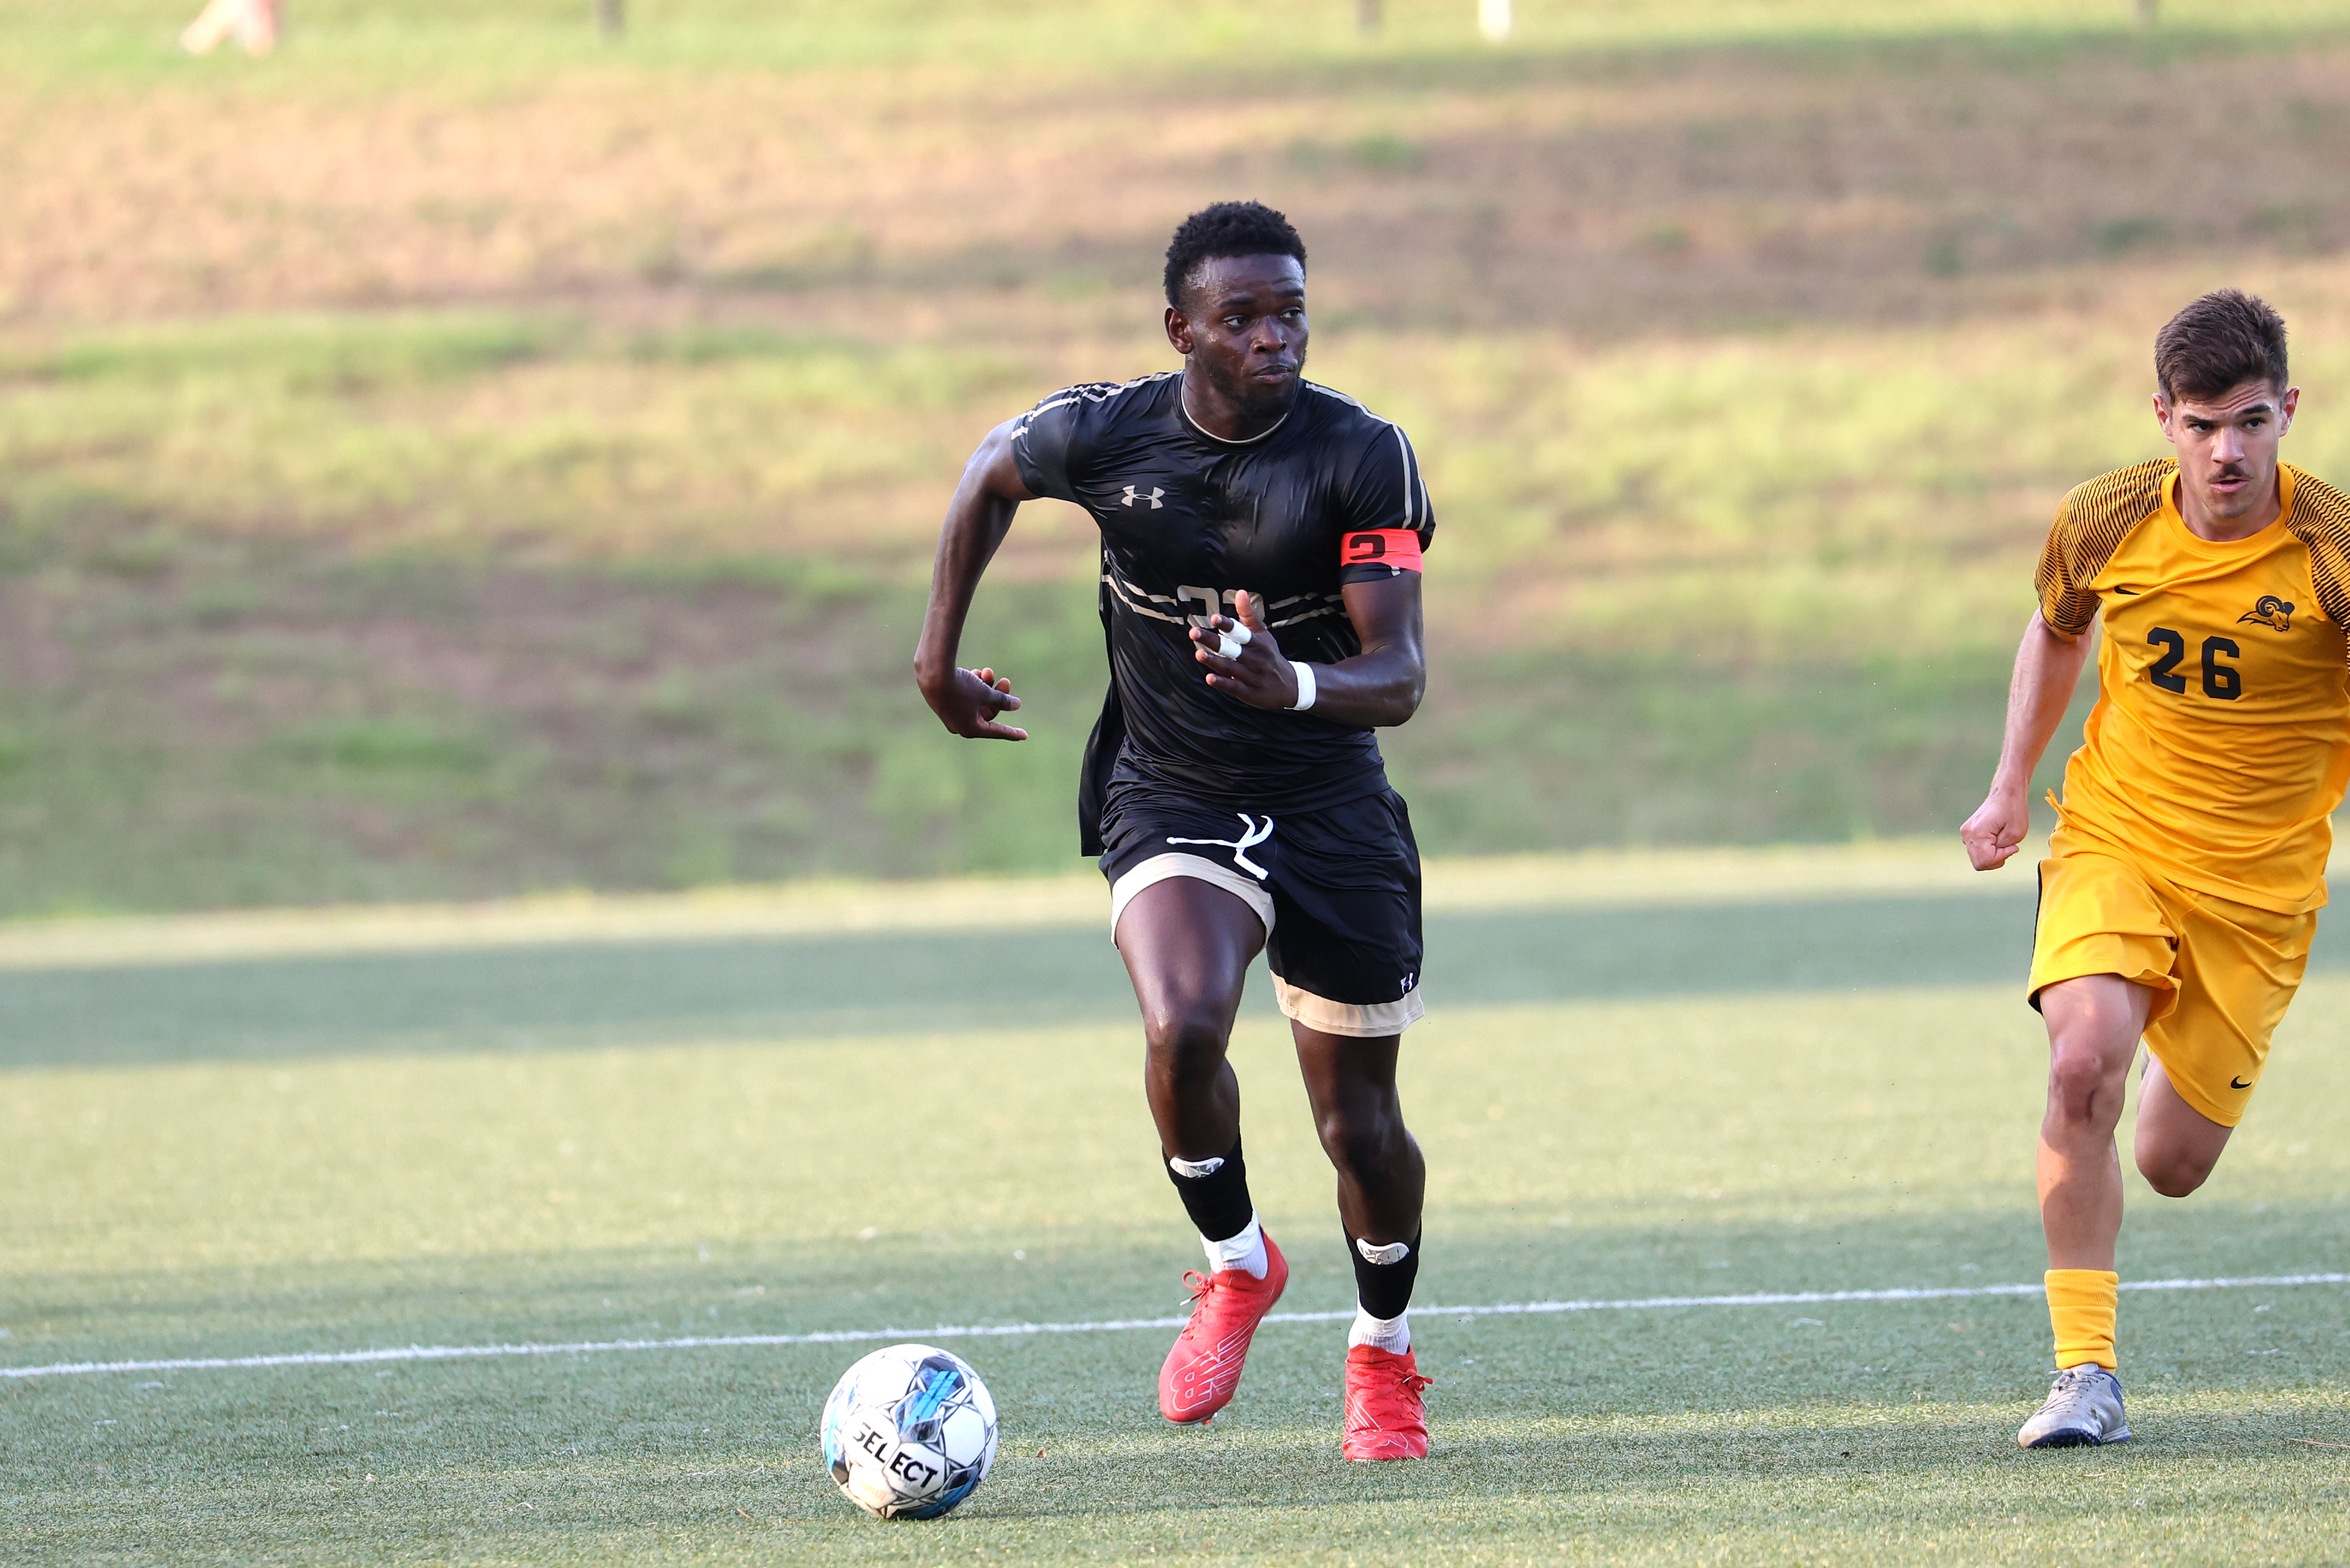 Oduwole's late goal lifts Eagles to third straight victory